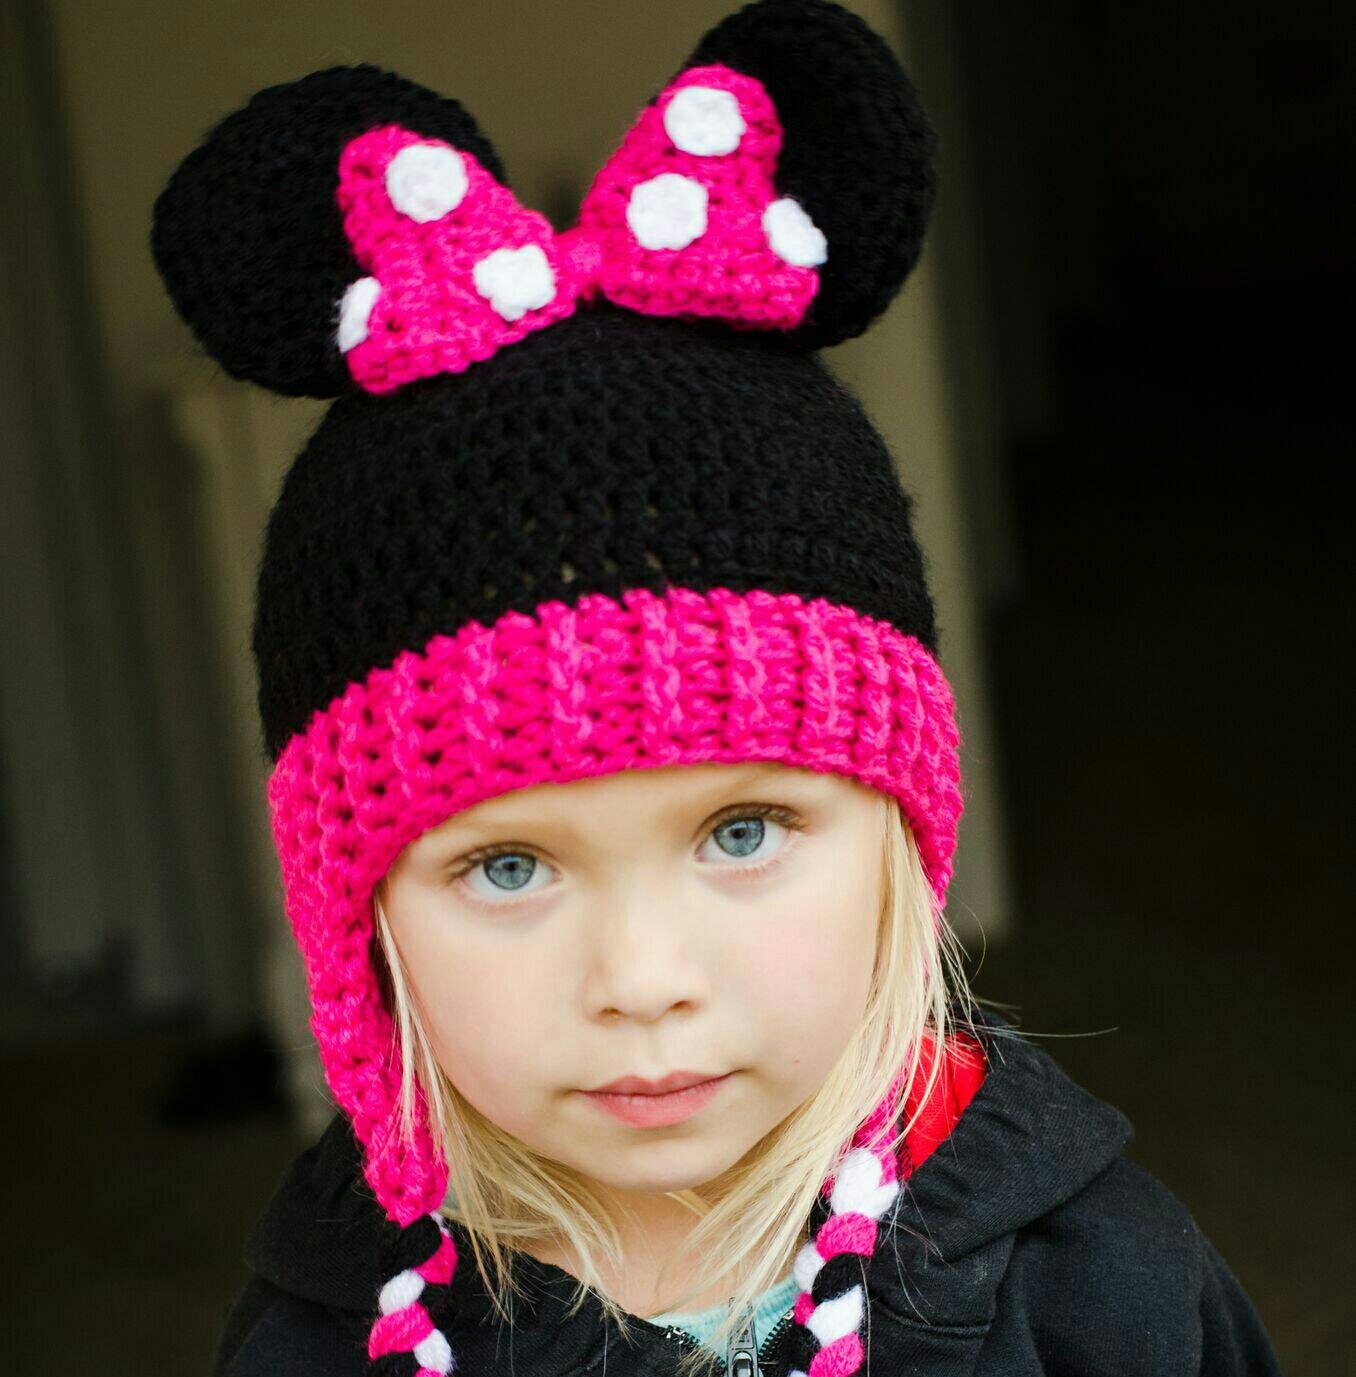 Minnie Mouse Crocheted Beanie with Earflaps braids and large